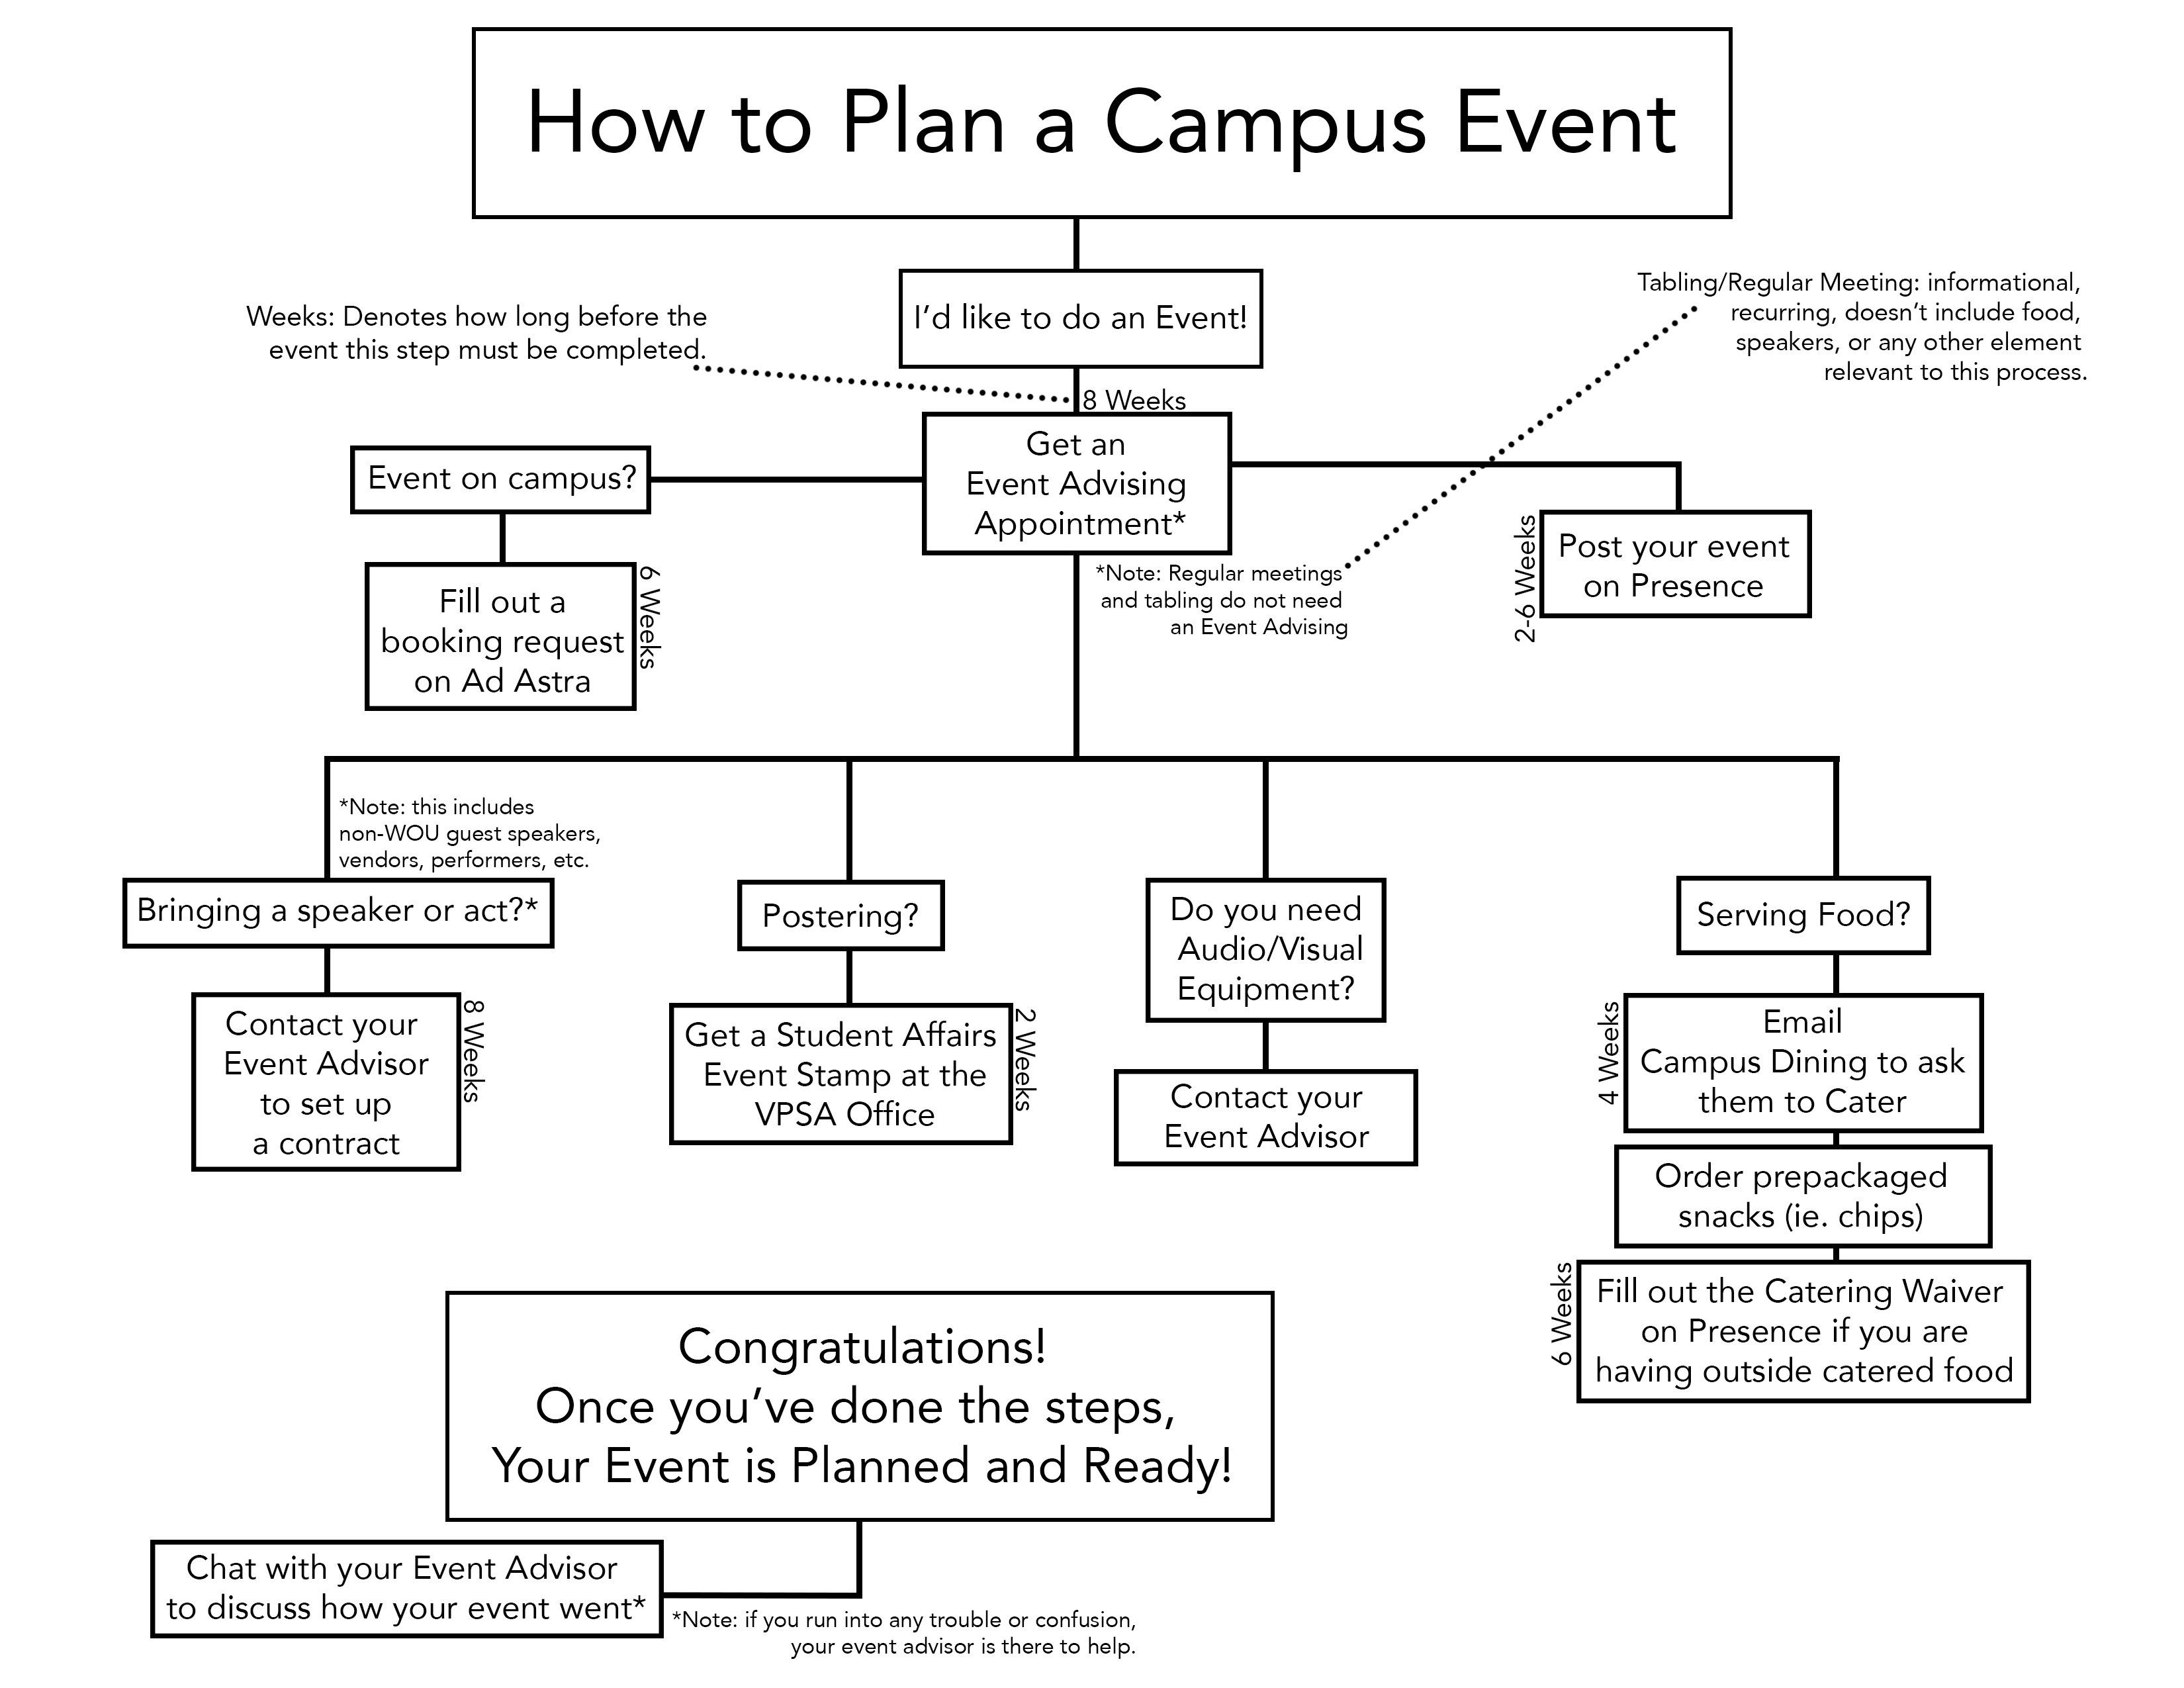 Flowchart of "How to Plan a Campus Event"